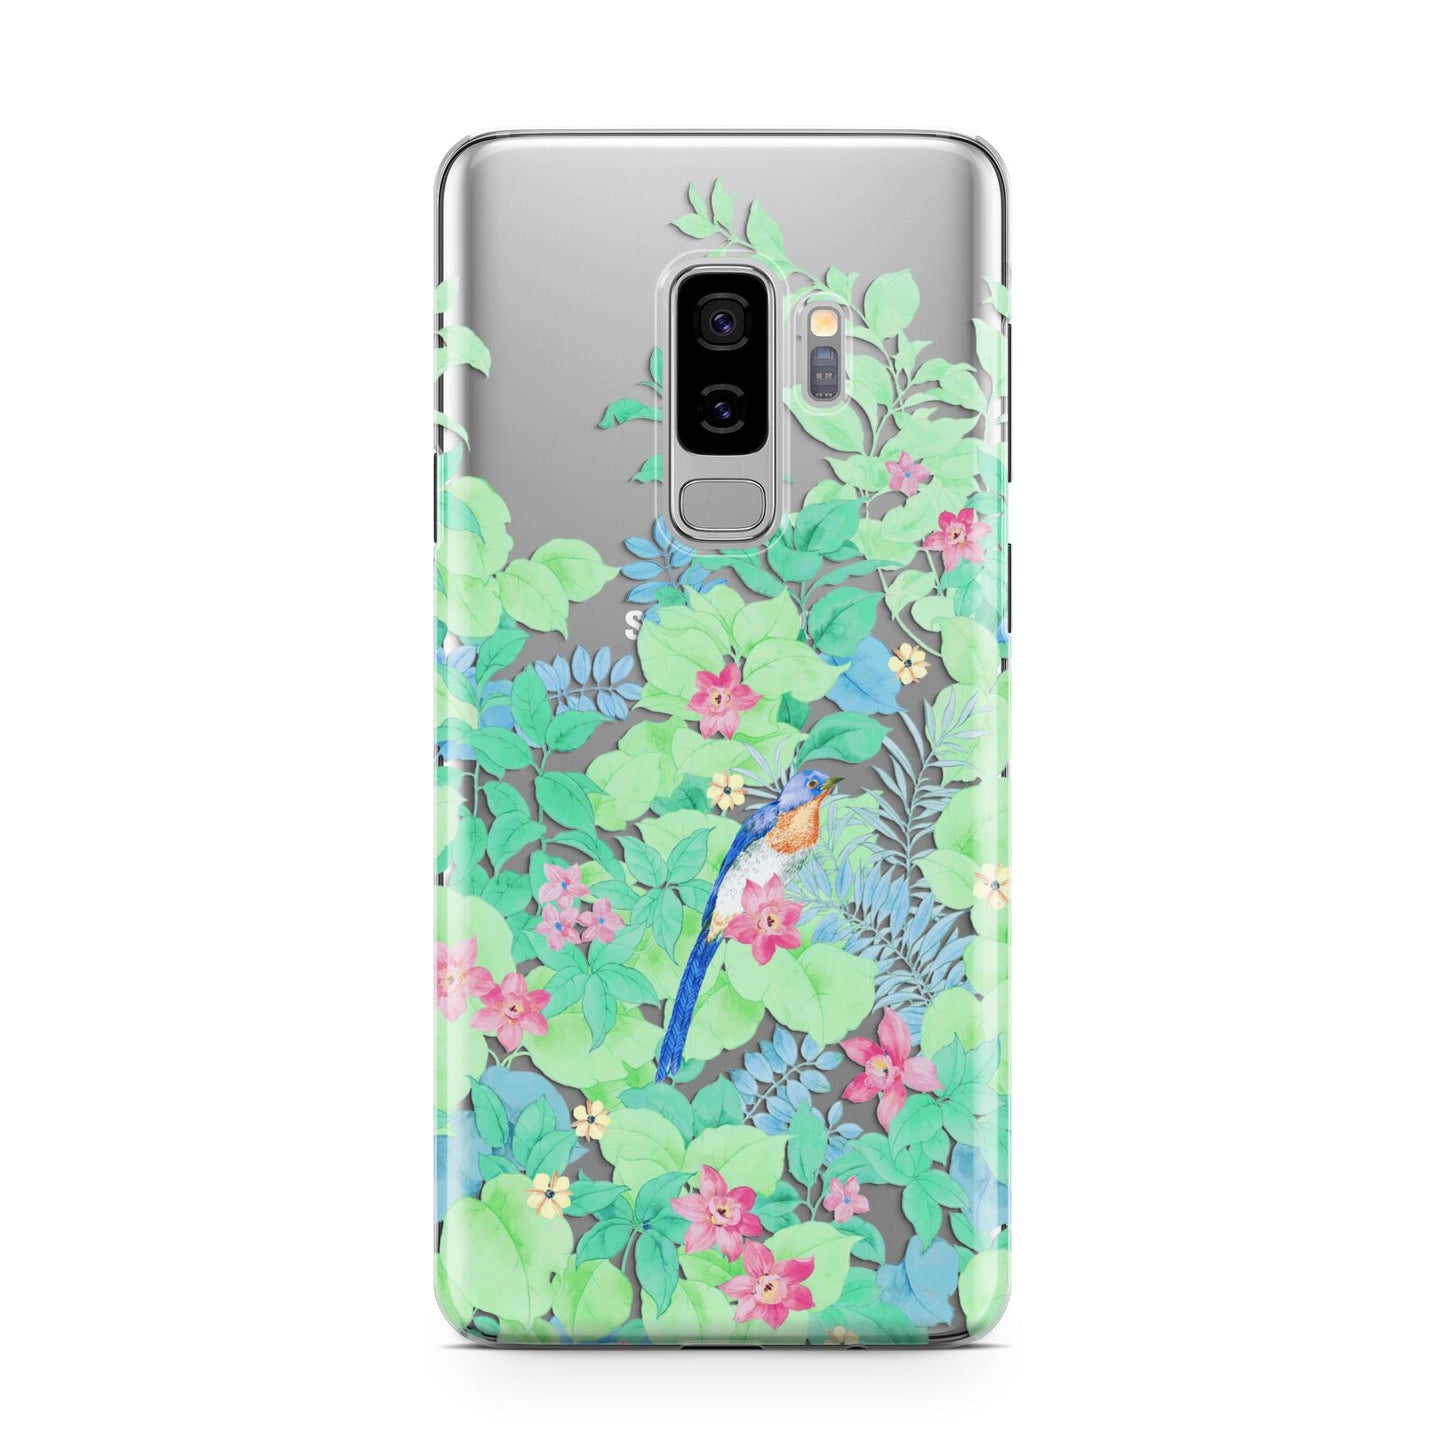 Watercolour Floral Samsung Galaxy S9 Plus Case on Silver phone